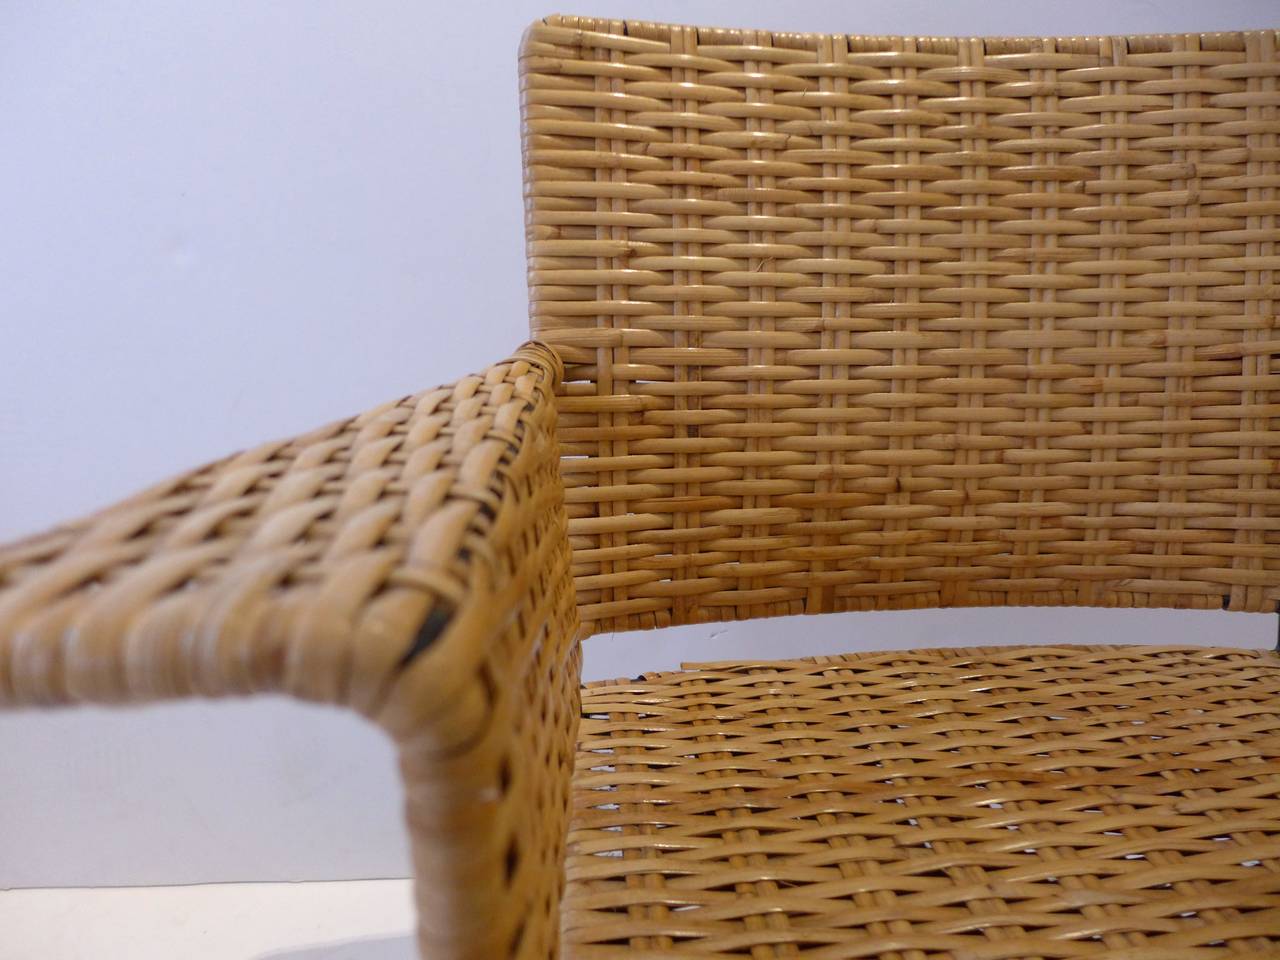 Woven Van Keppel-Green Chair in Wrought Iron and Rattan